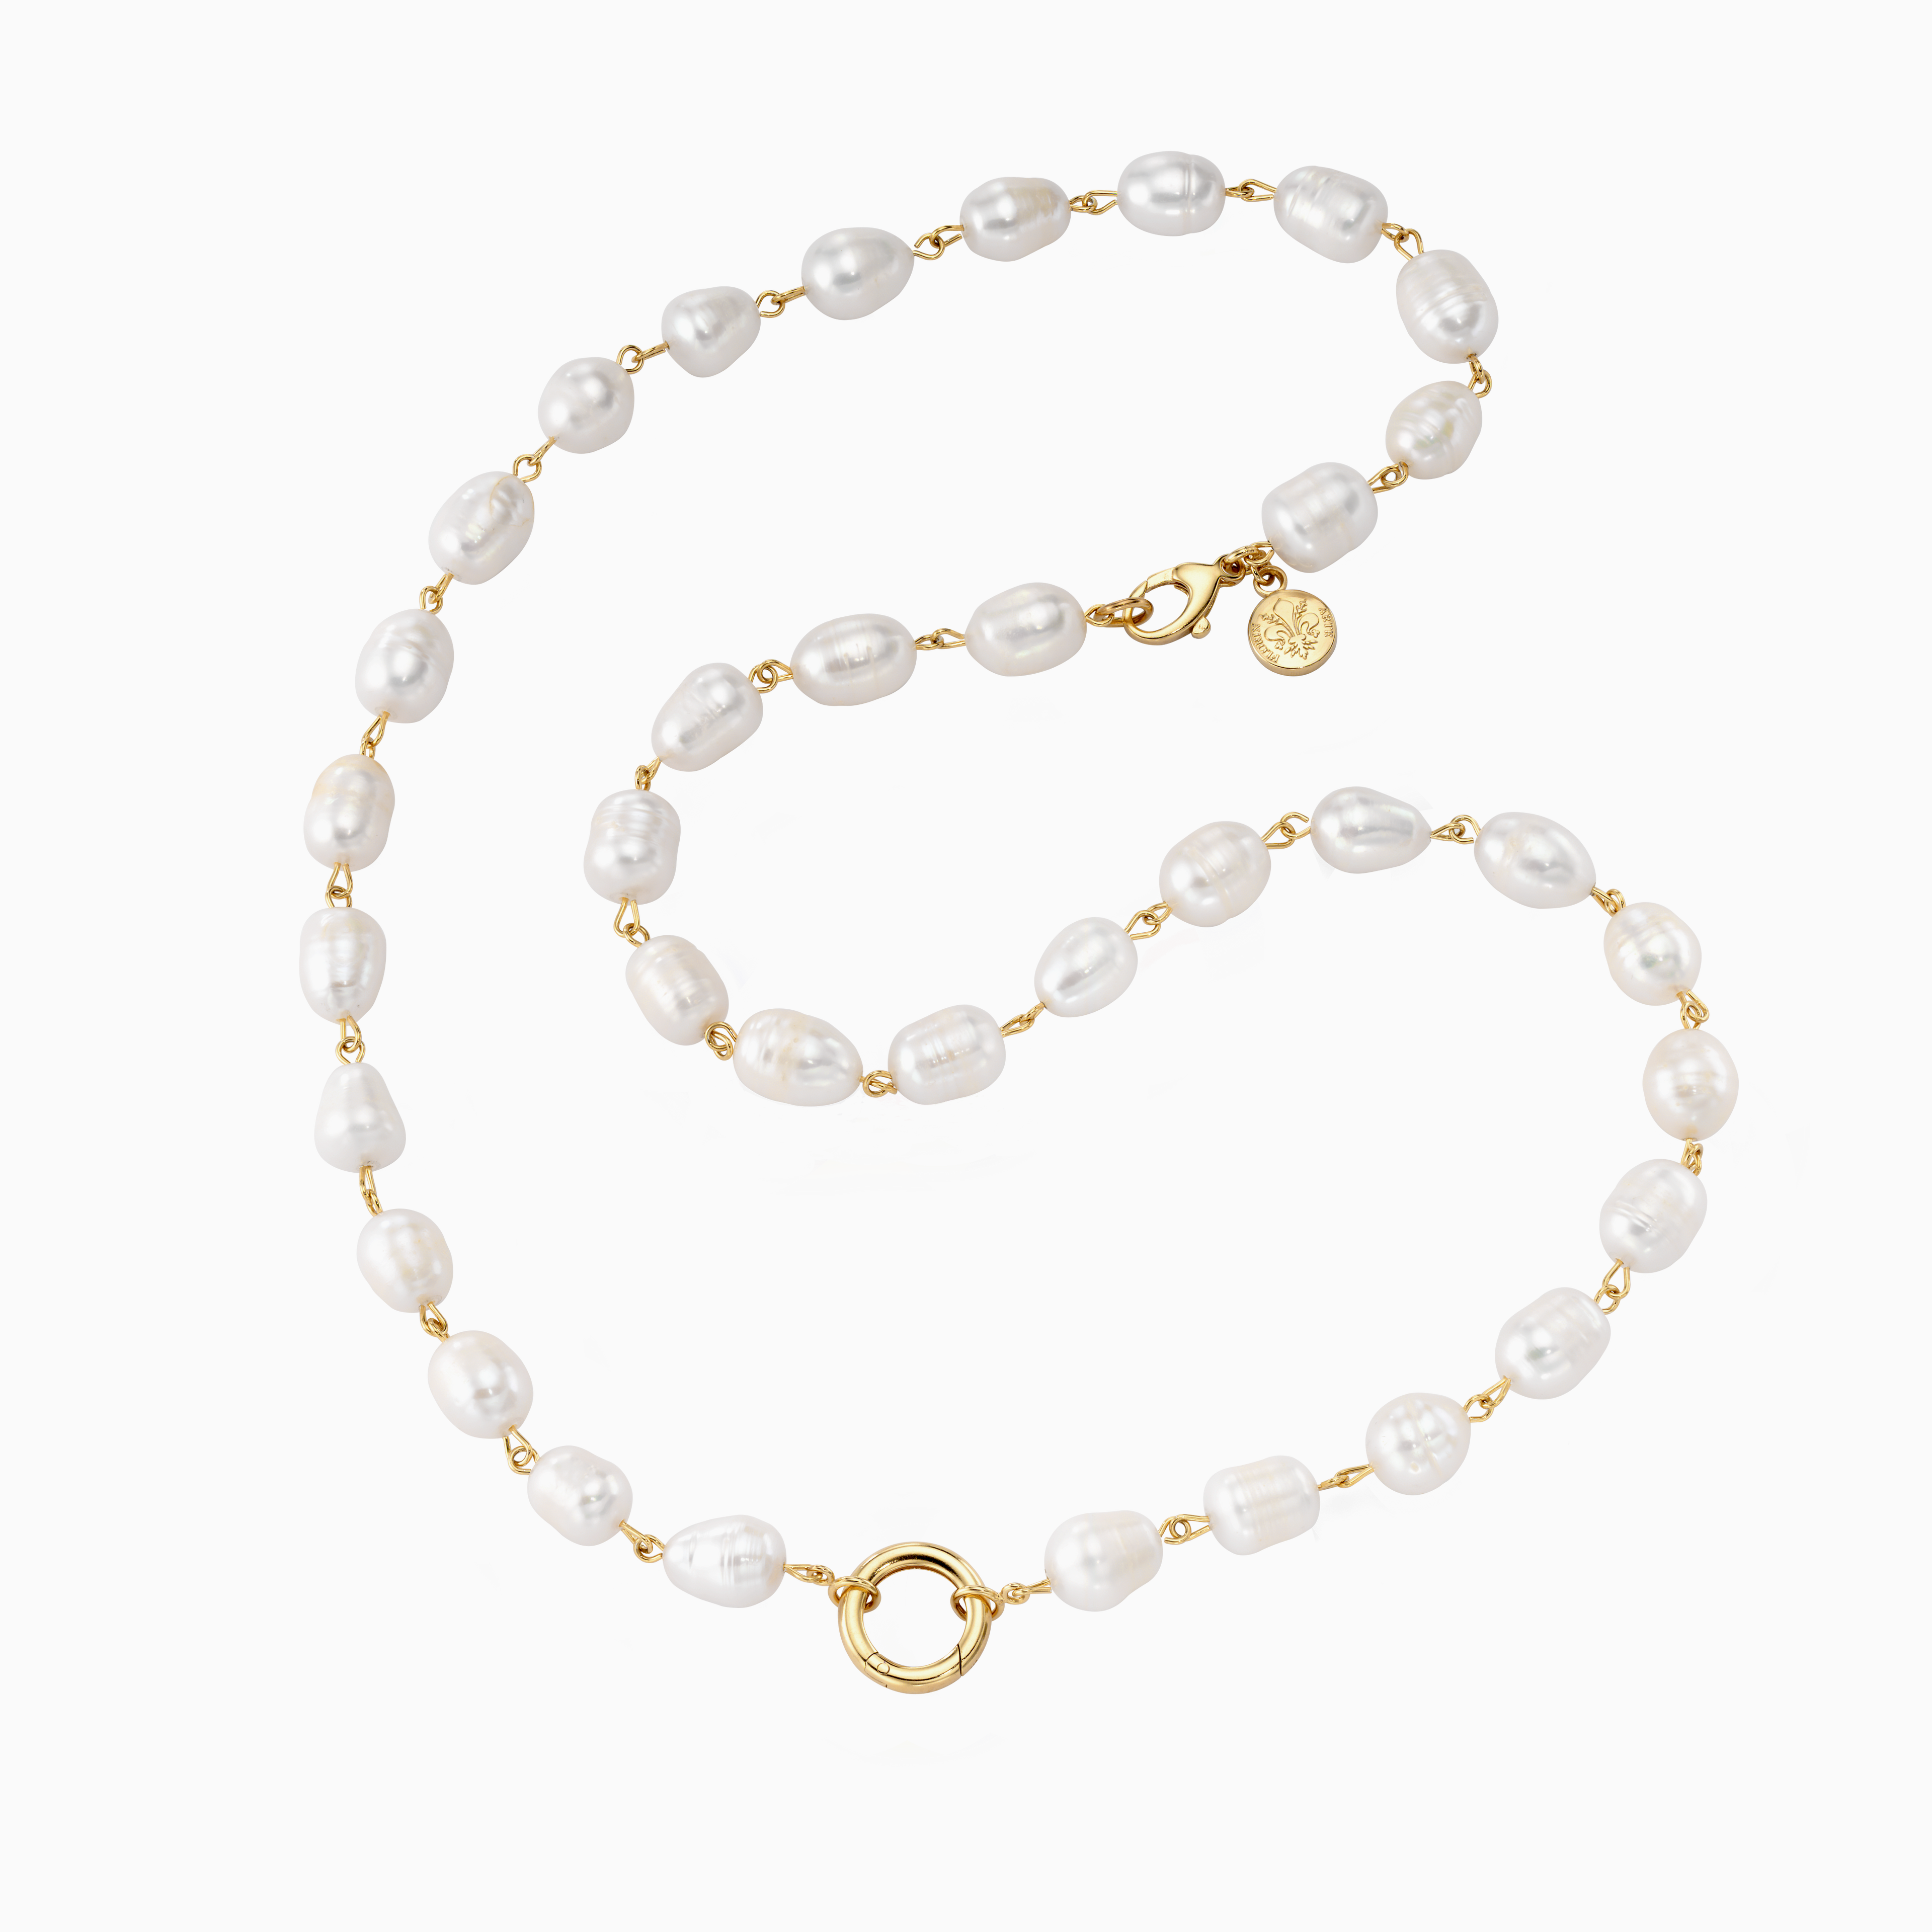 Inspired Essentials Pearl Loop Charm Necklace - 24"